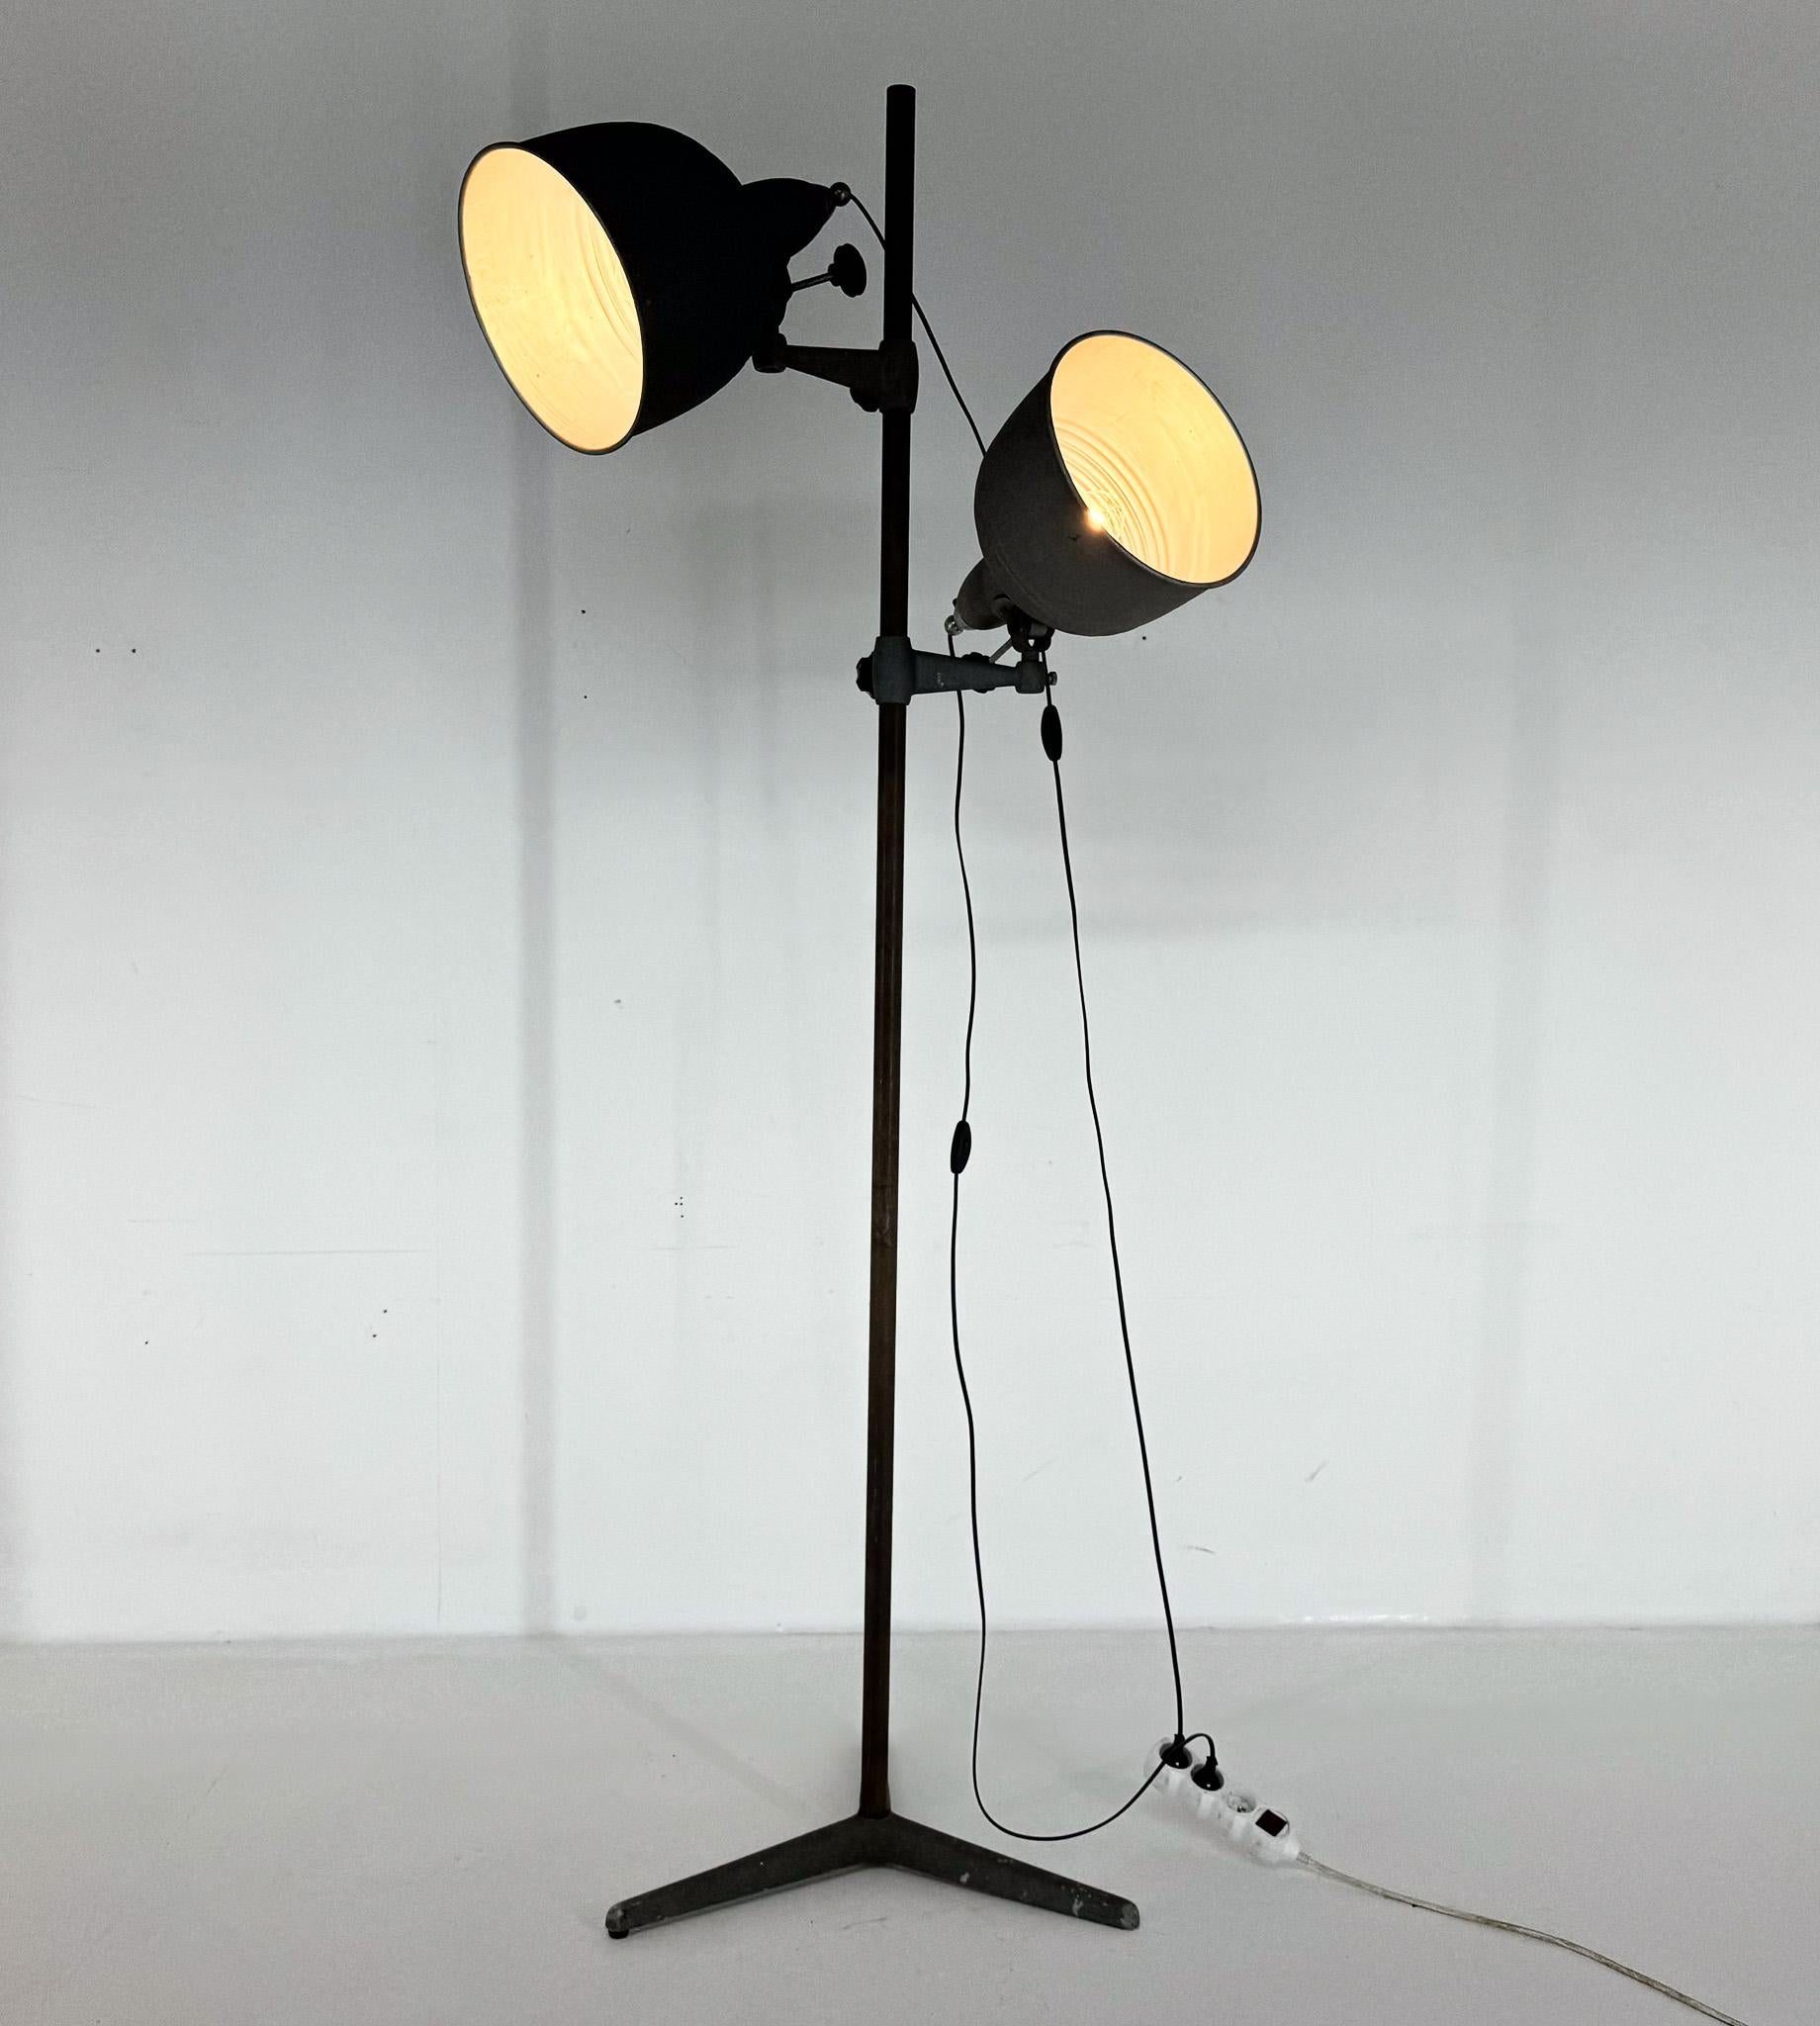 Large metal photo studio spot light produced in Italy in 1950's-60's. Both lights can be adjusted in hight and direction and can be turned on and off separately. 
Bulbs: 2 x 1 E26-E27. New wiring. US adapter included.